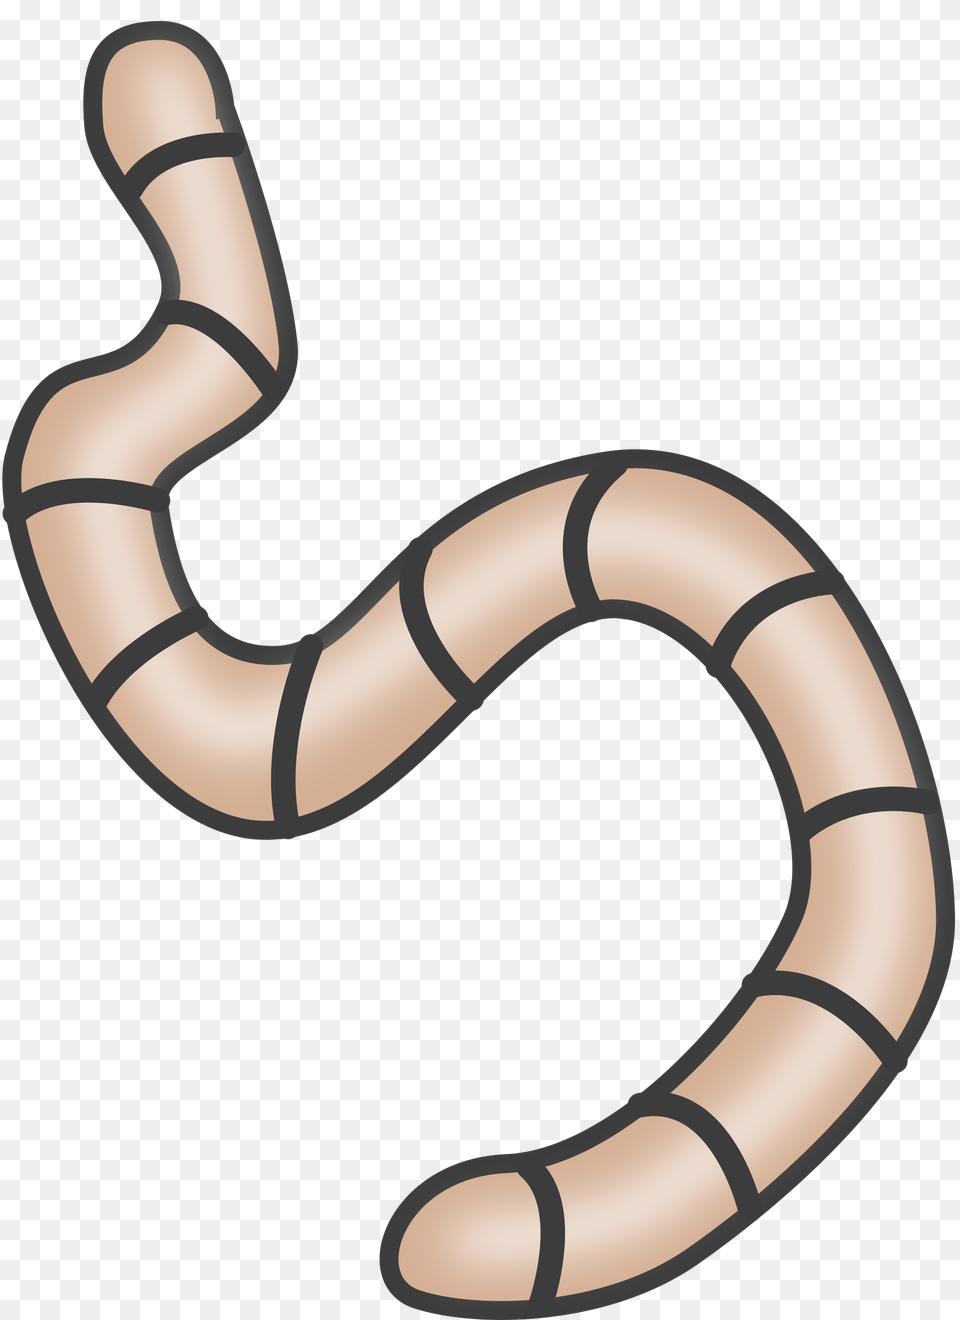 Worm Animal Biology Background Worm Clipart, Smoke Pipe, Reptile, Snake Free Transparent Png